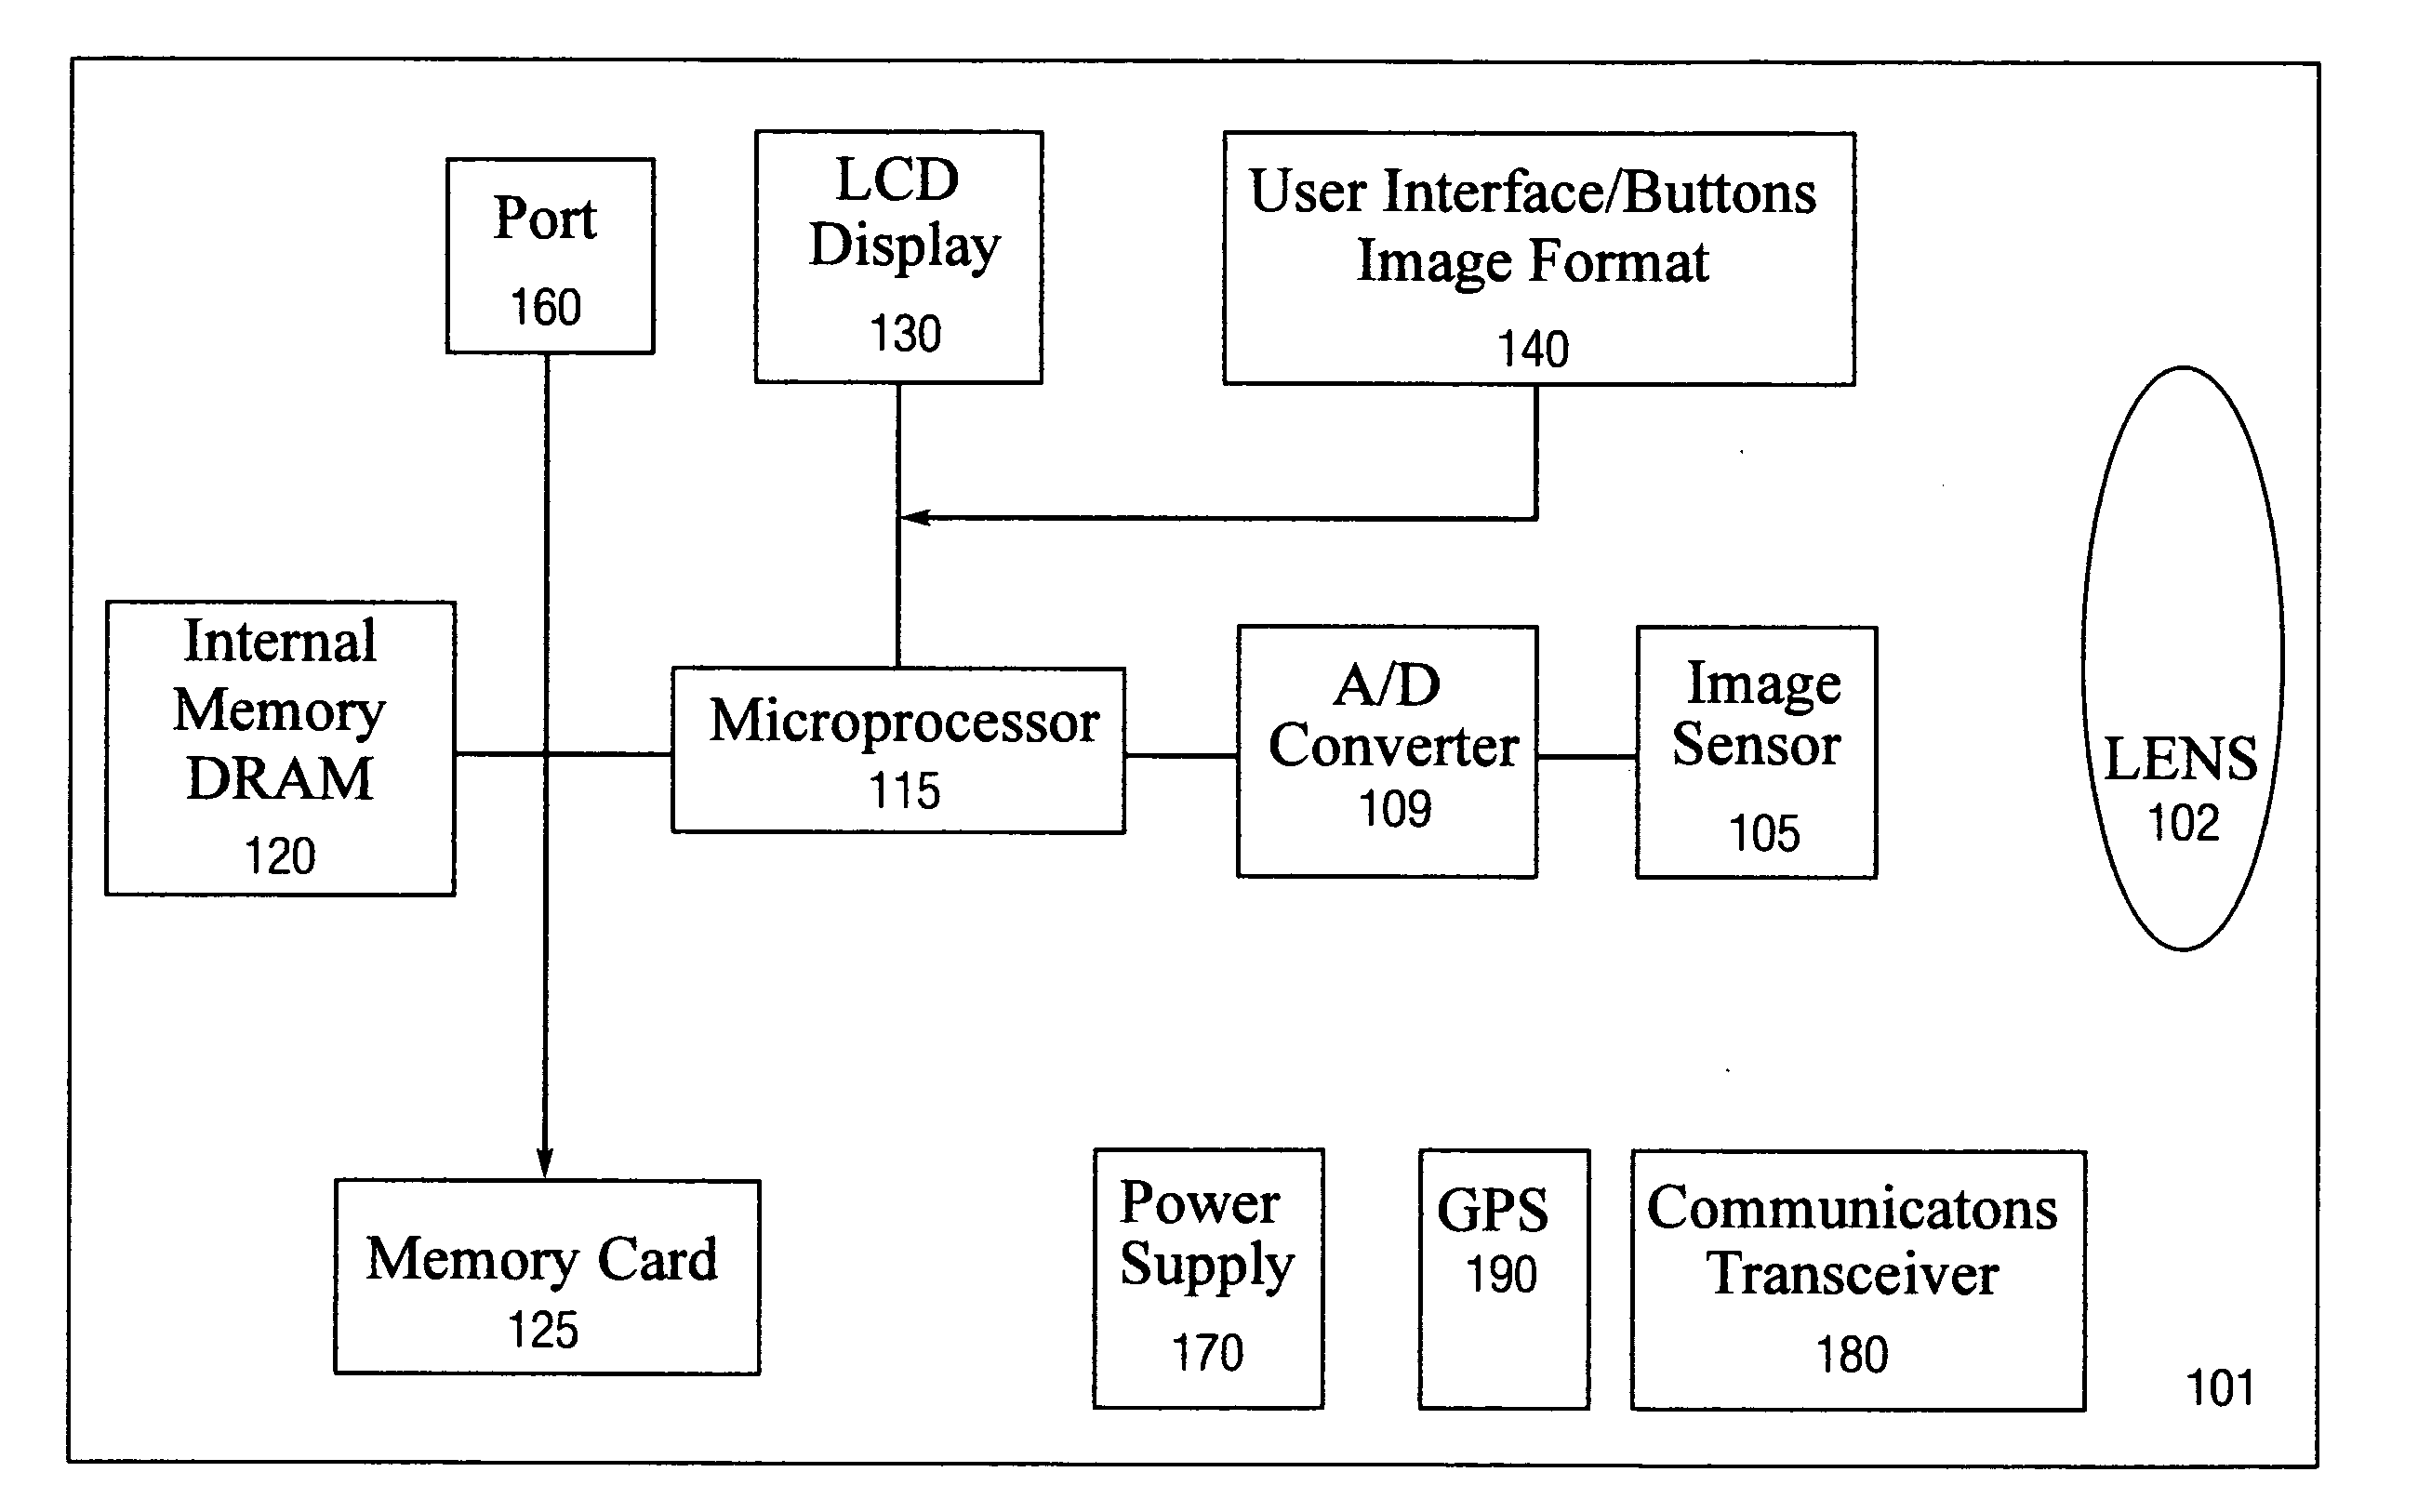 Method of processing and storing files in a digital camera